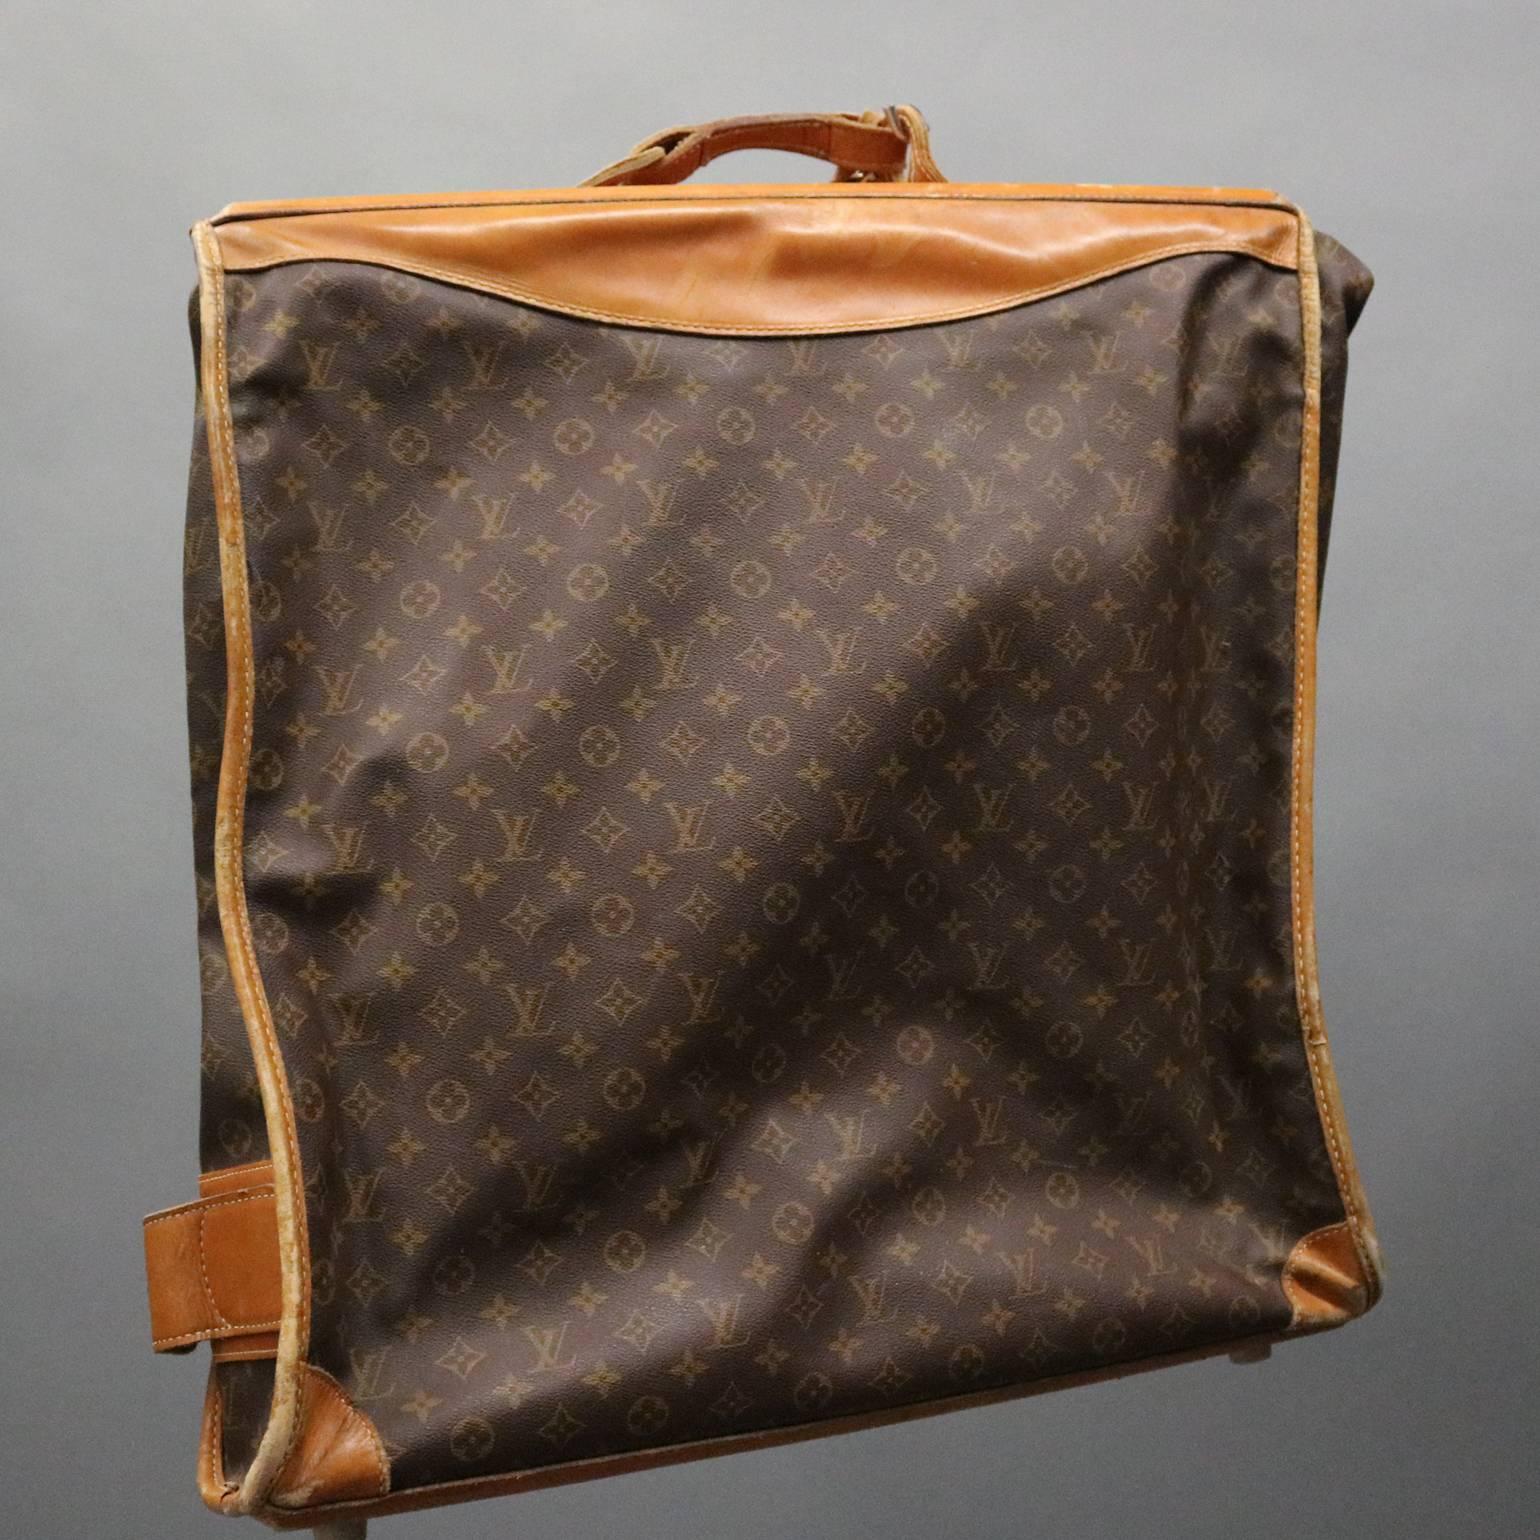 Vintage French Louis Vuitton style traveling bag features quality construction with main garment compartment and additional zippered storage pouches, reminiscent of the authentic Louis Vuitton monogram canvas portable Bandouliere garment bag, made